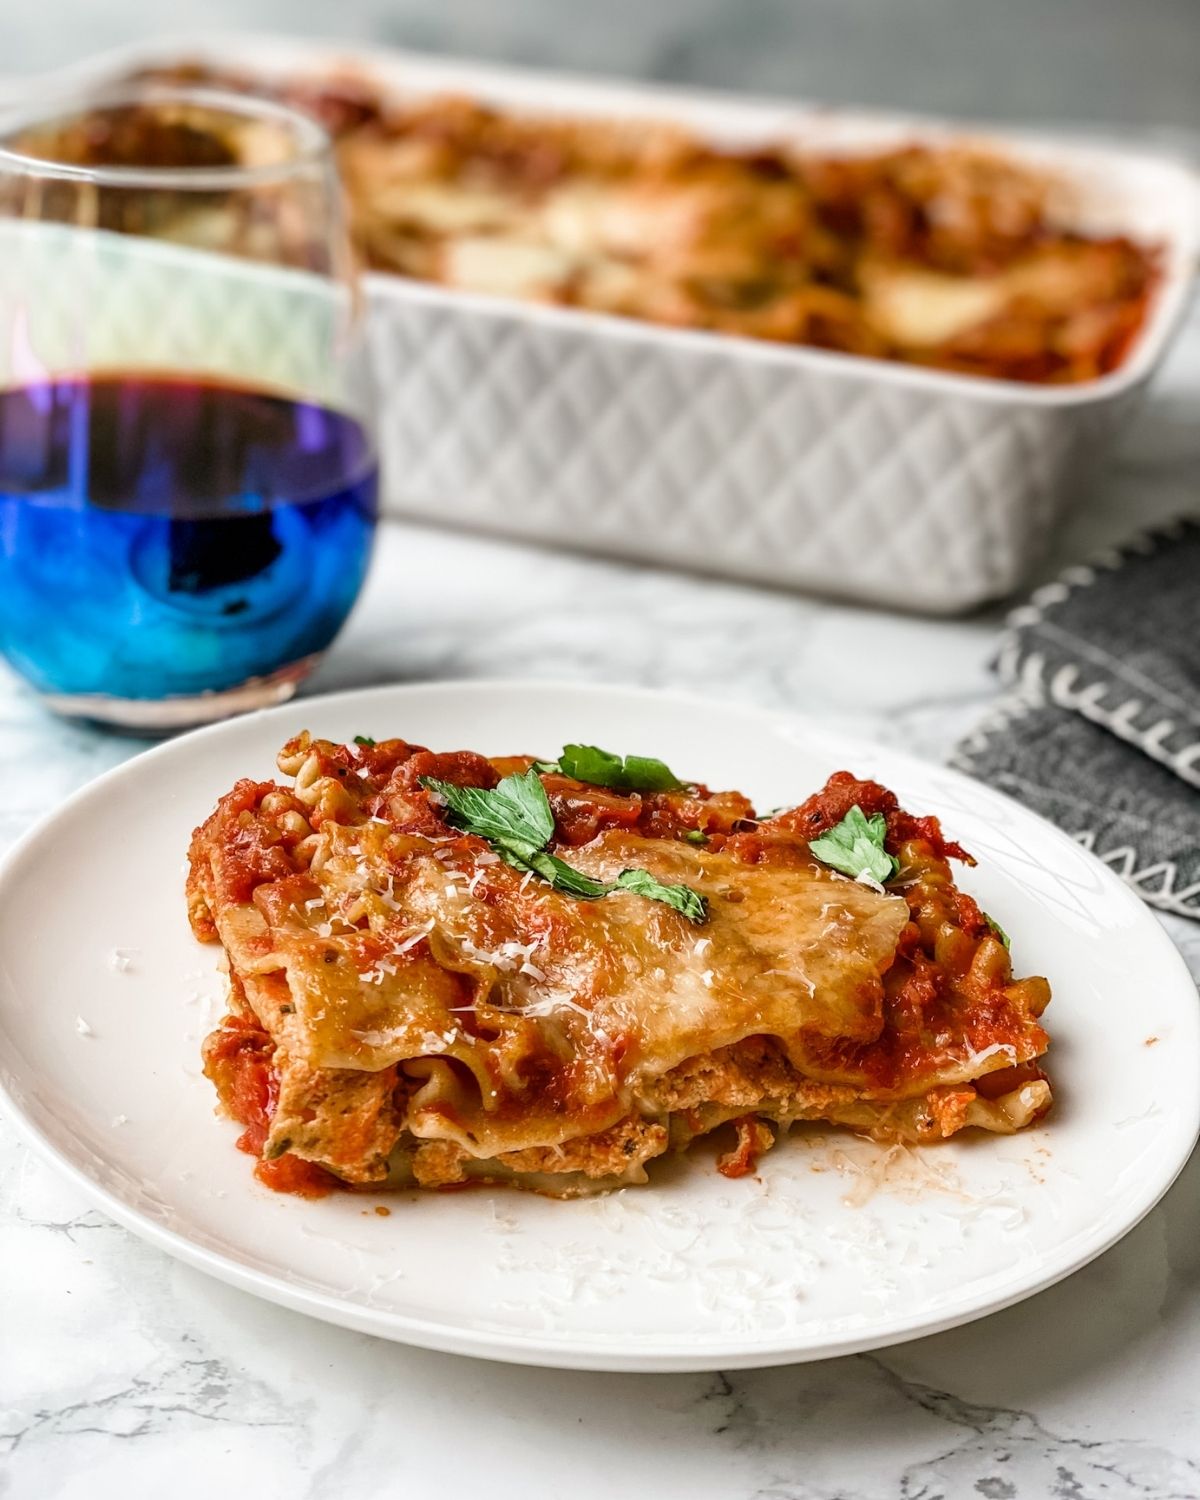 A piece of lasagna with a glass of wine behind it.